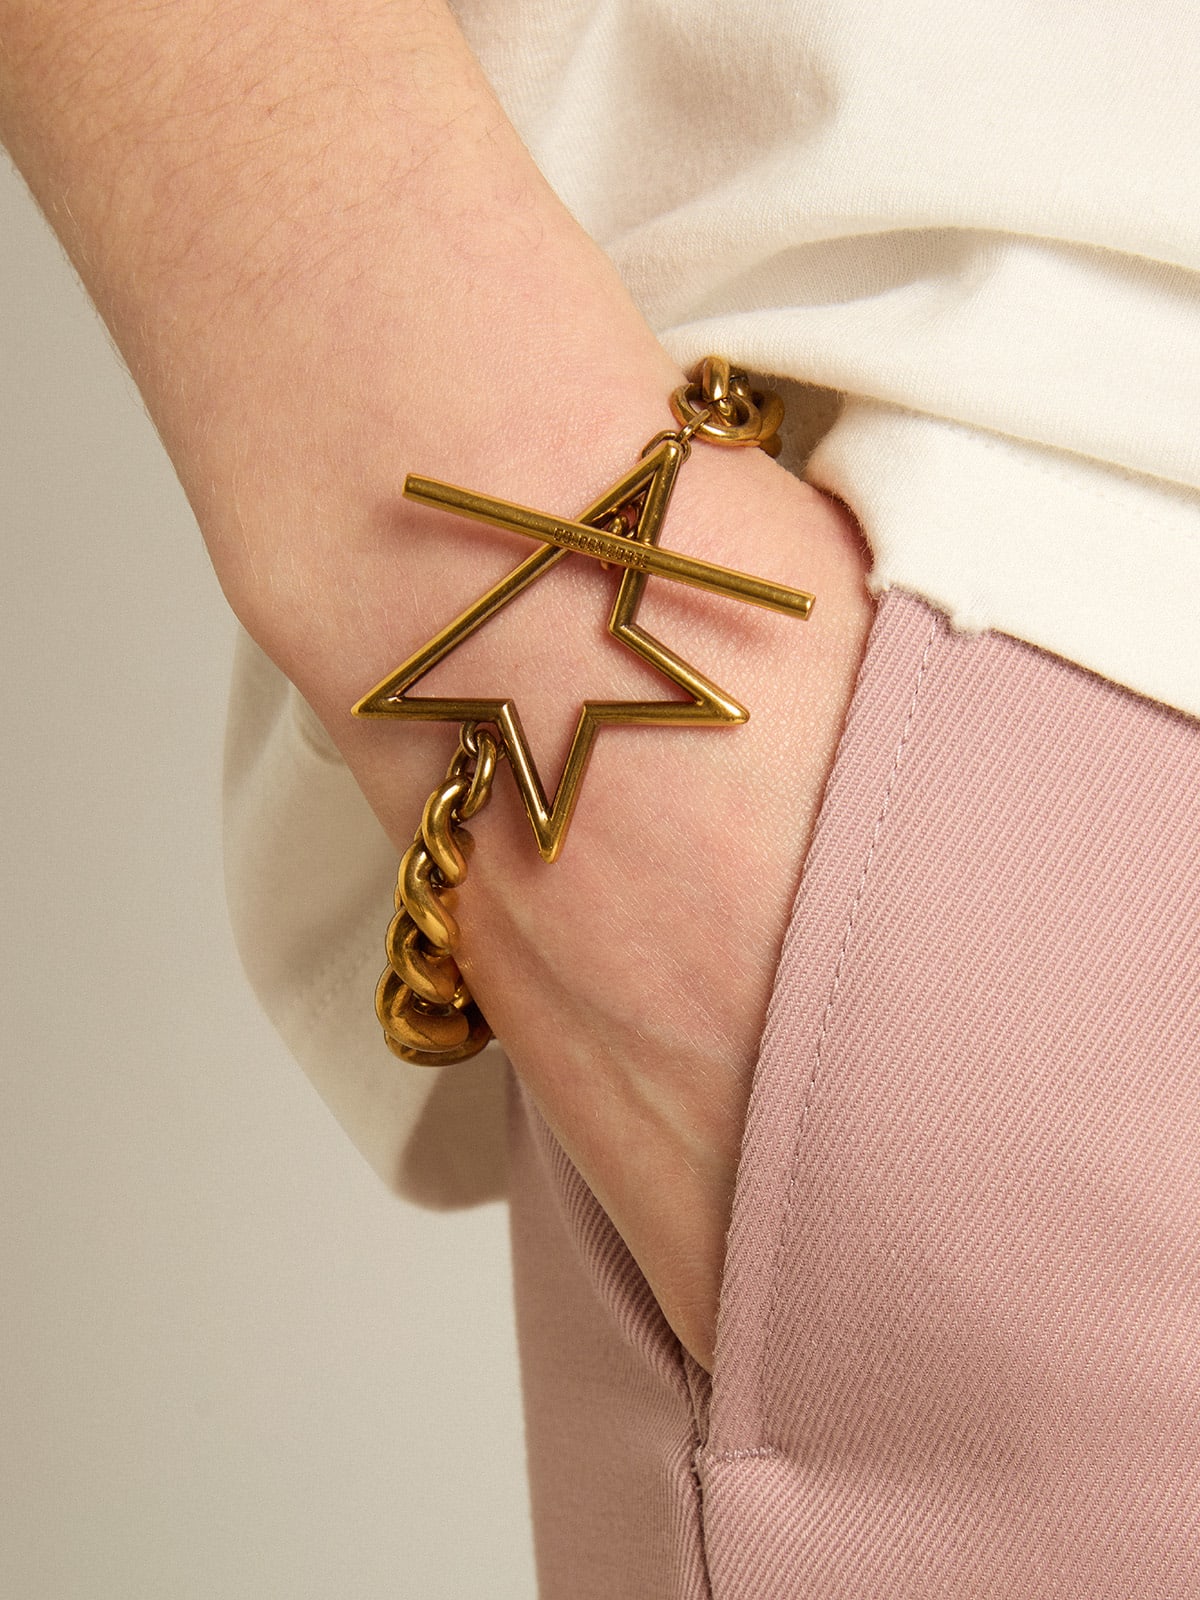 Golden Goose - Bracelet in old gold decreasing chain with star-shaped clasp in 